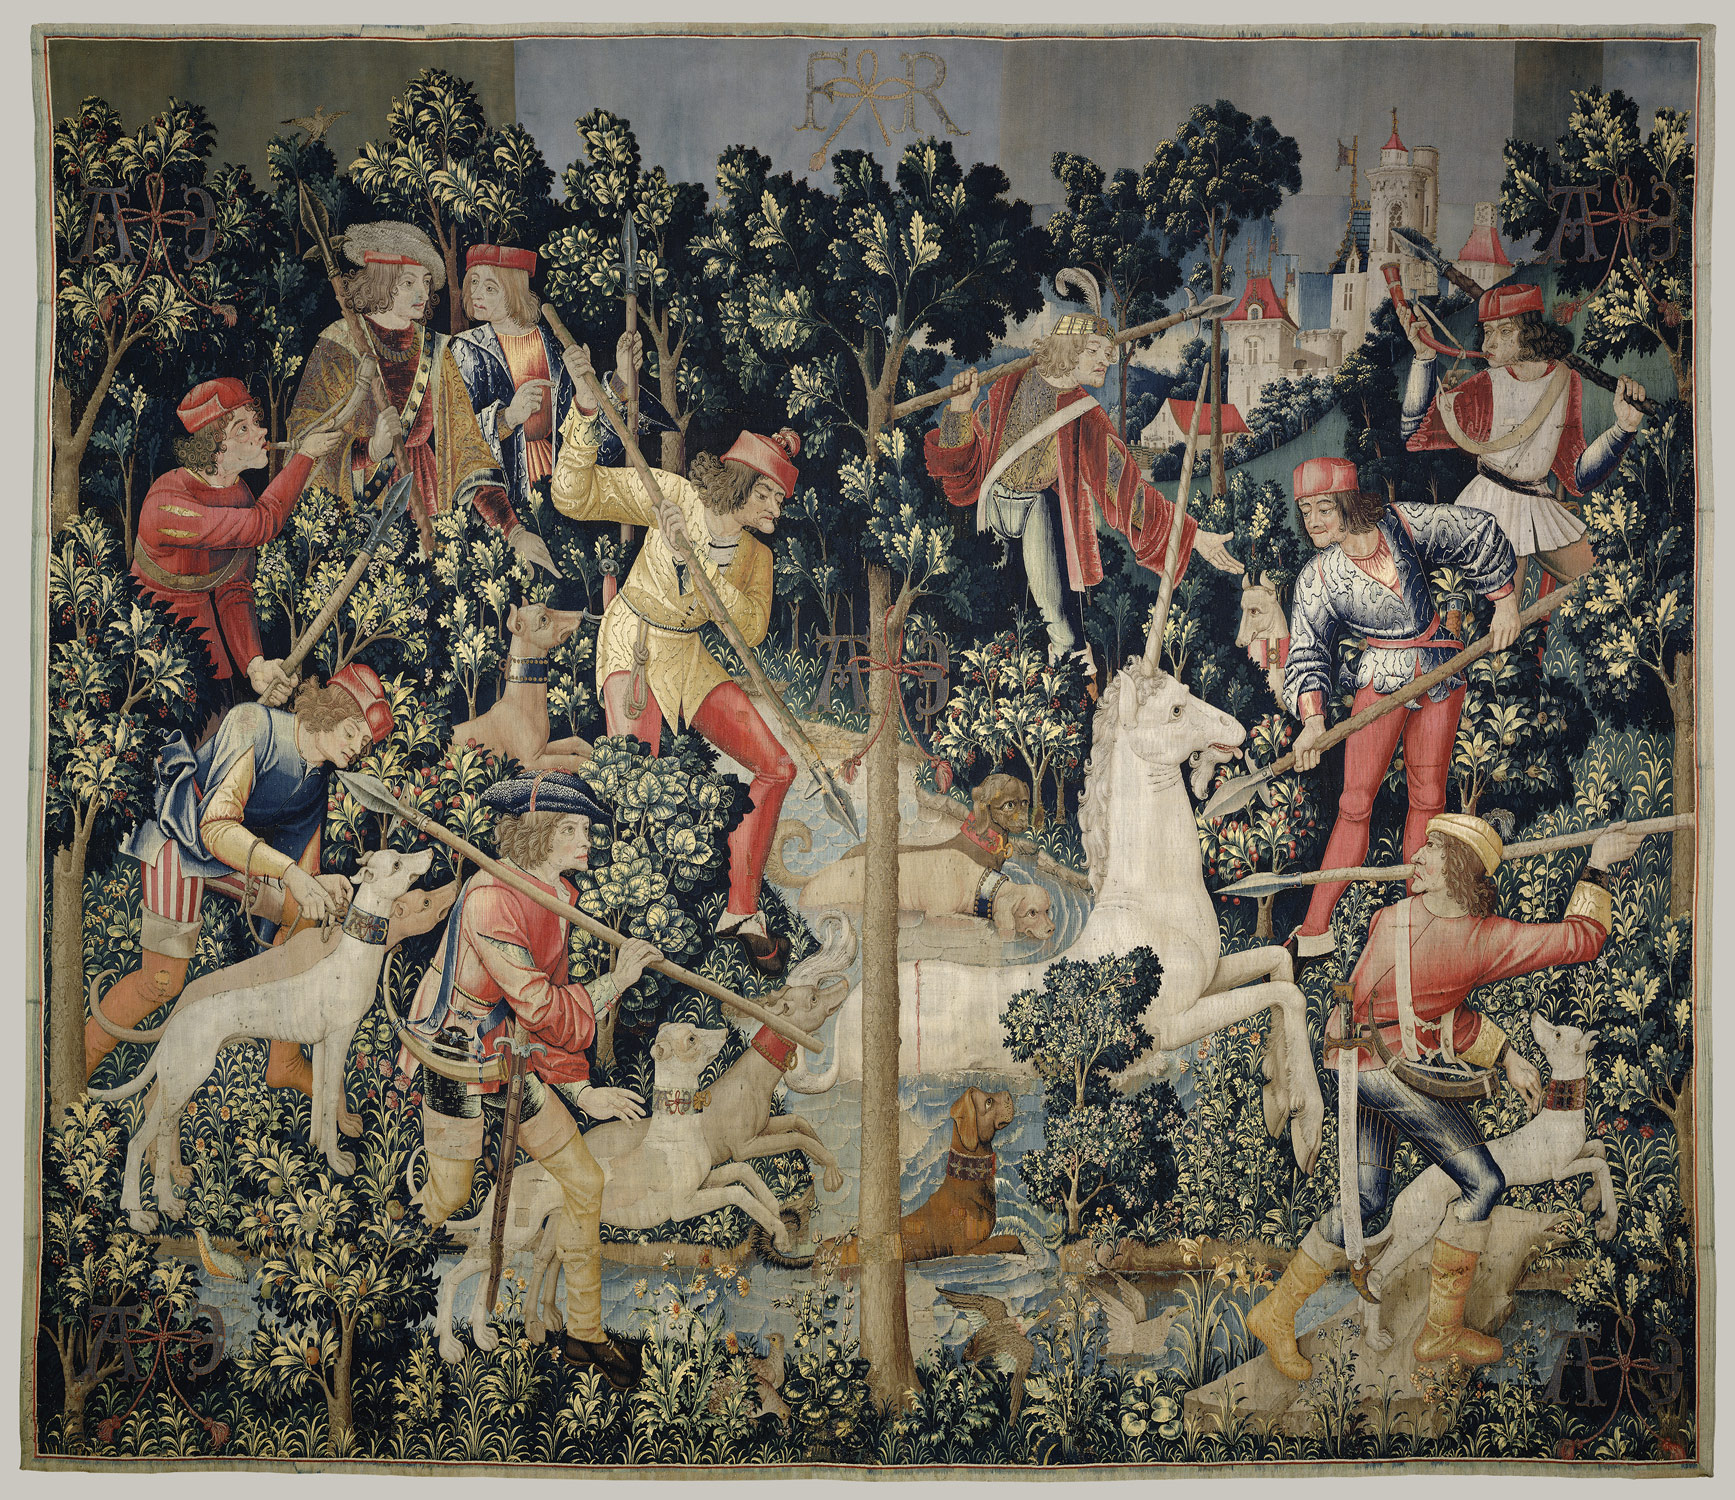 The Unicorn is Attacked (from the Unicorn Tapestries)